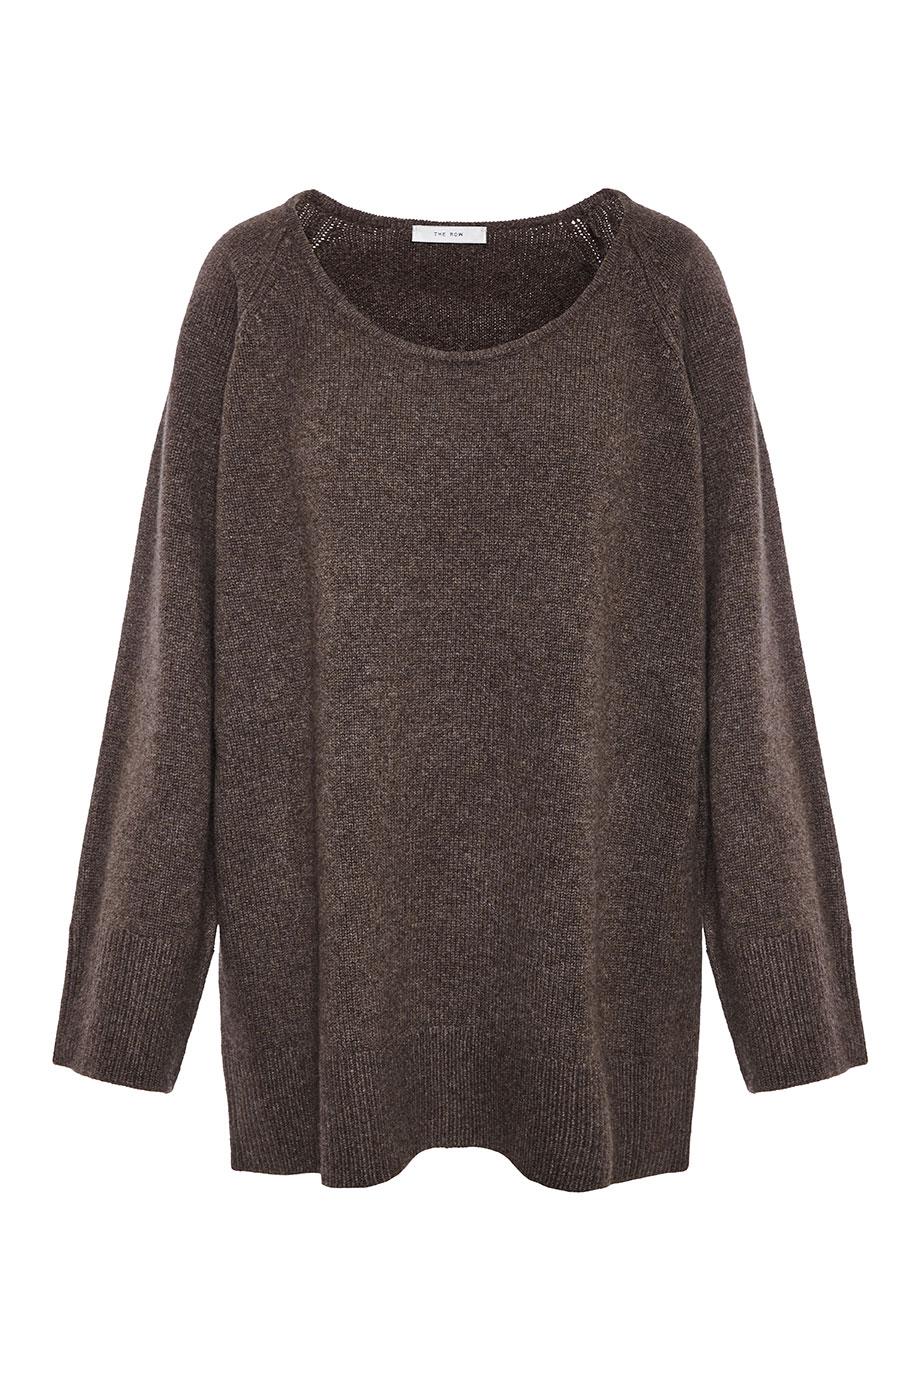 Damien wool and cashmere sweater